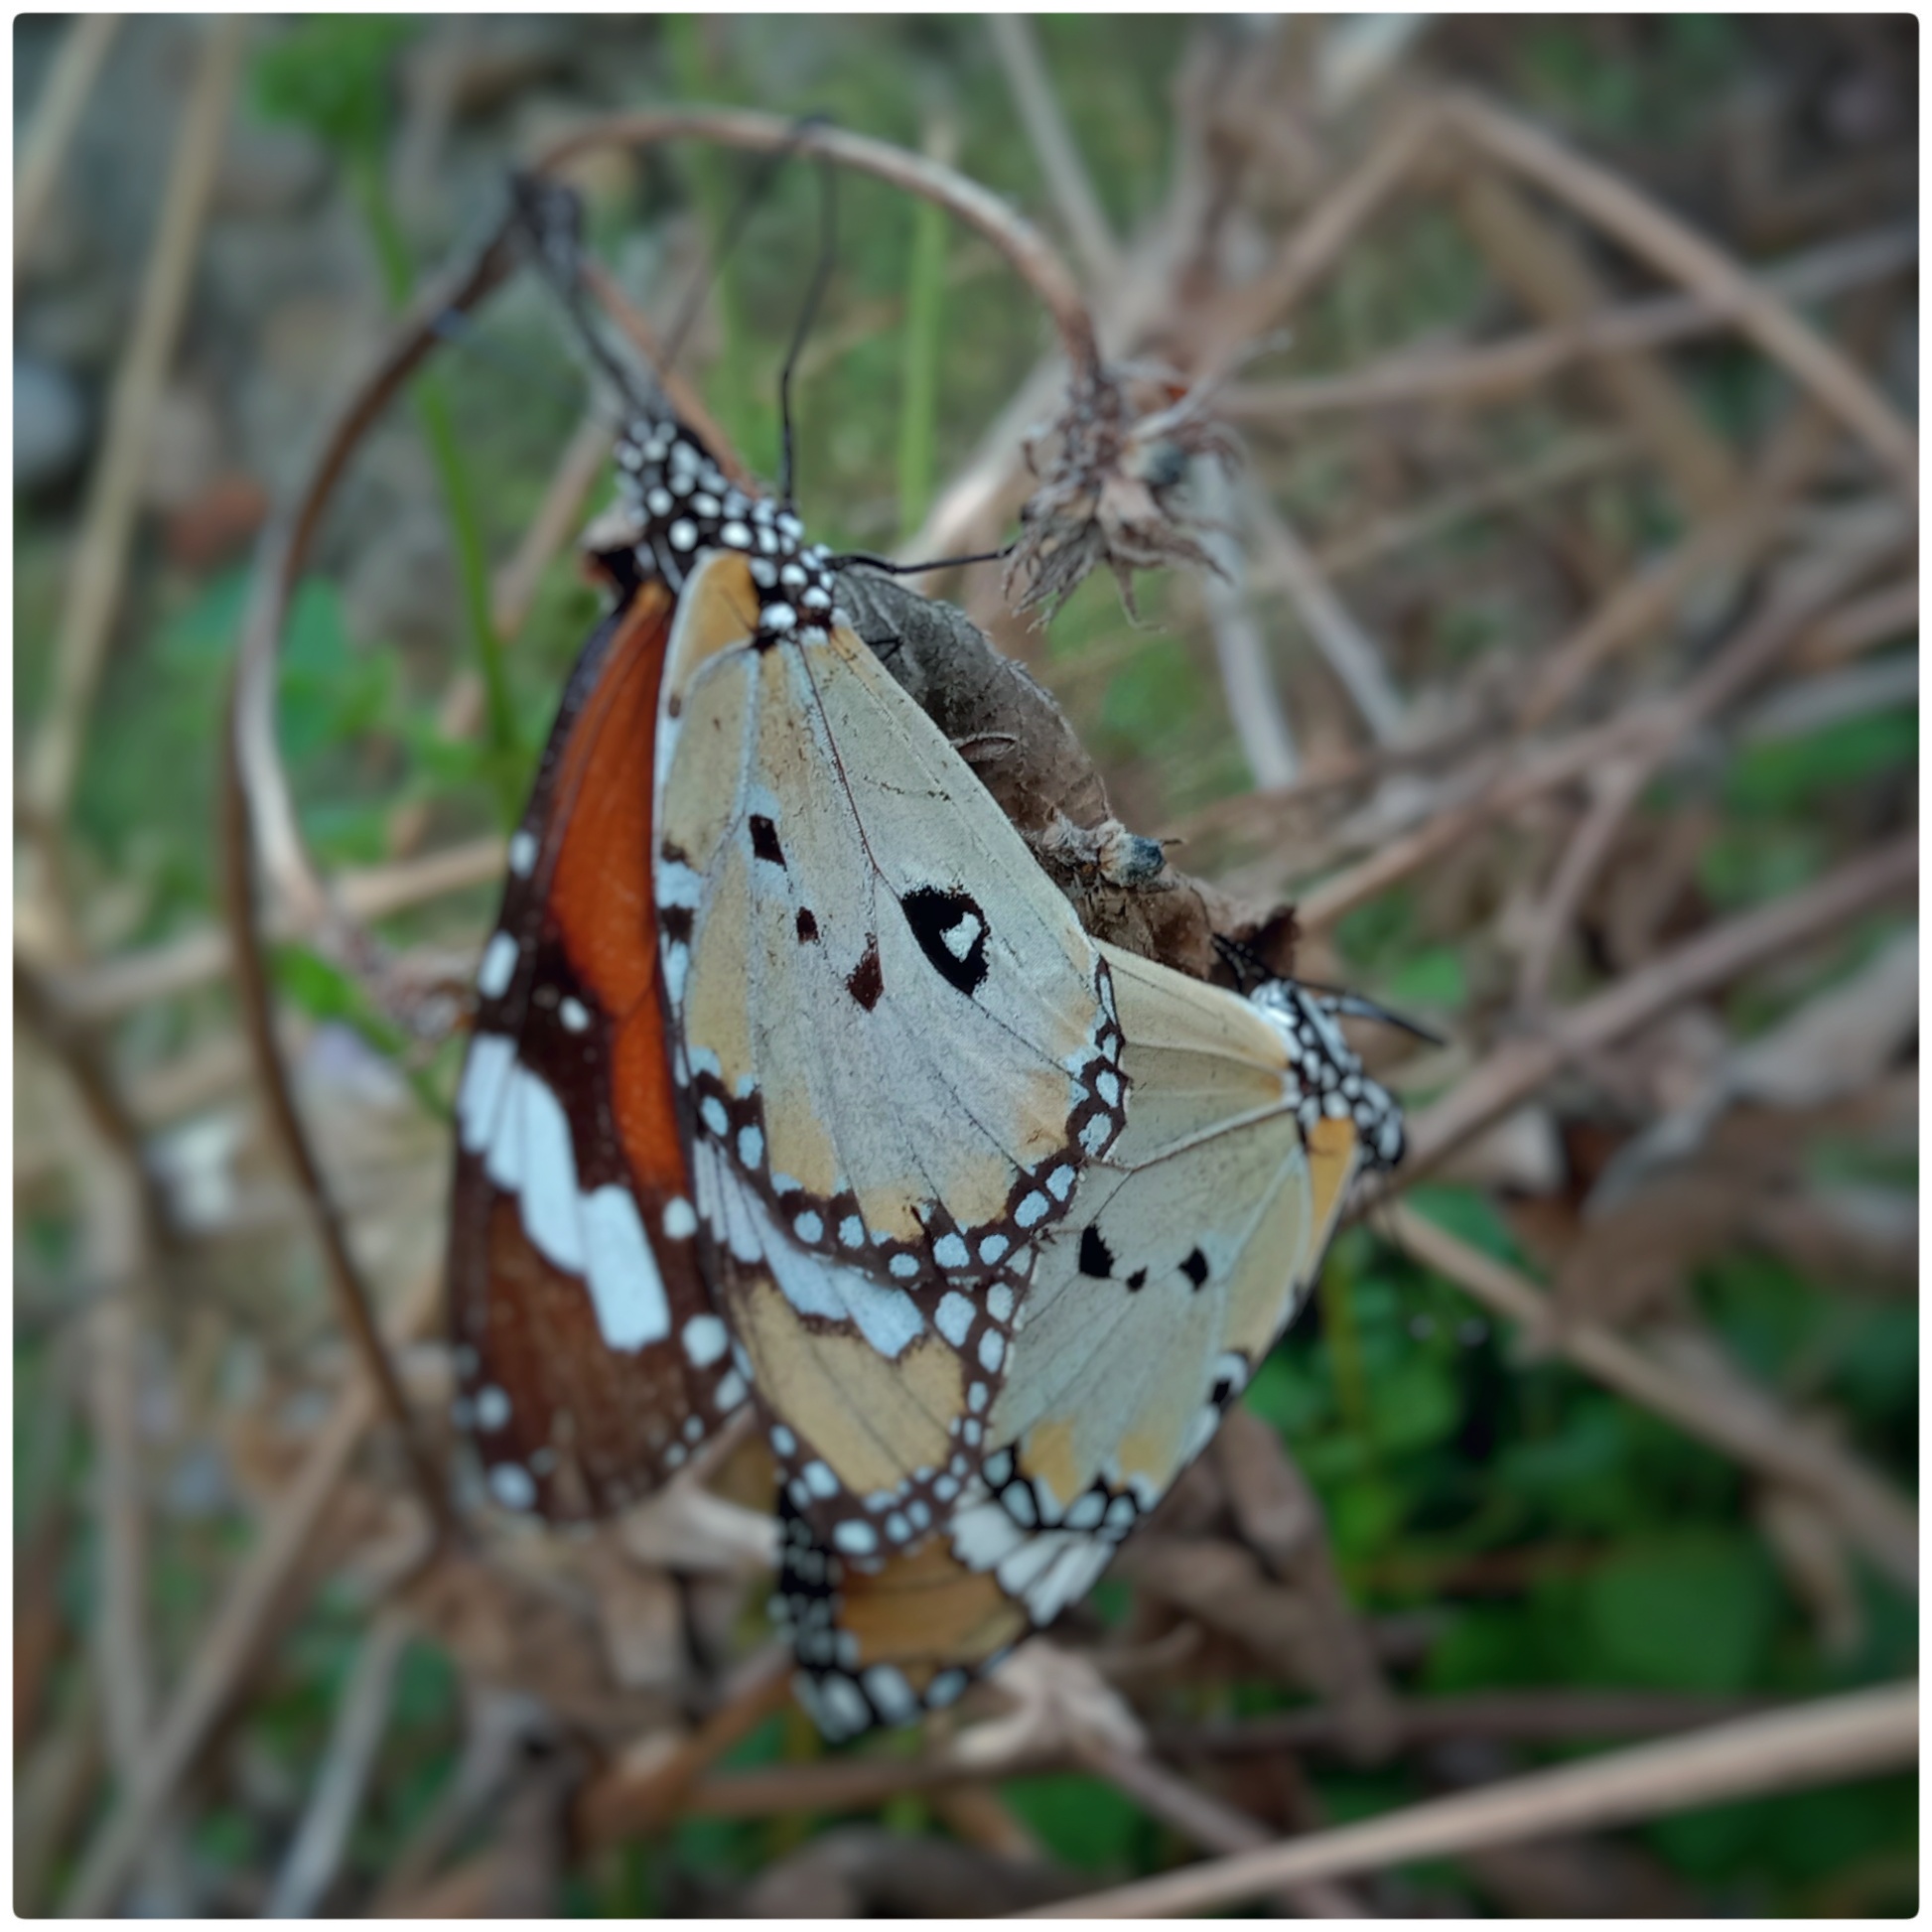 The life of the butterfly when preparing for the mating ritual — Hive